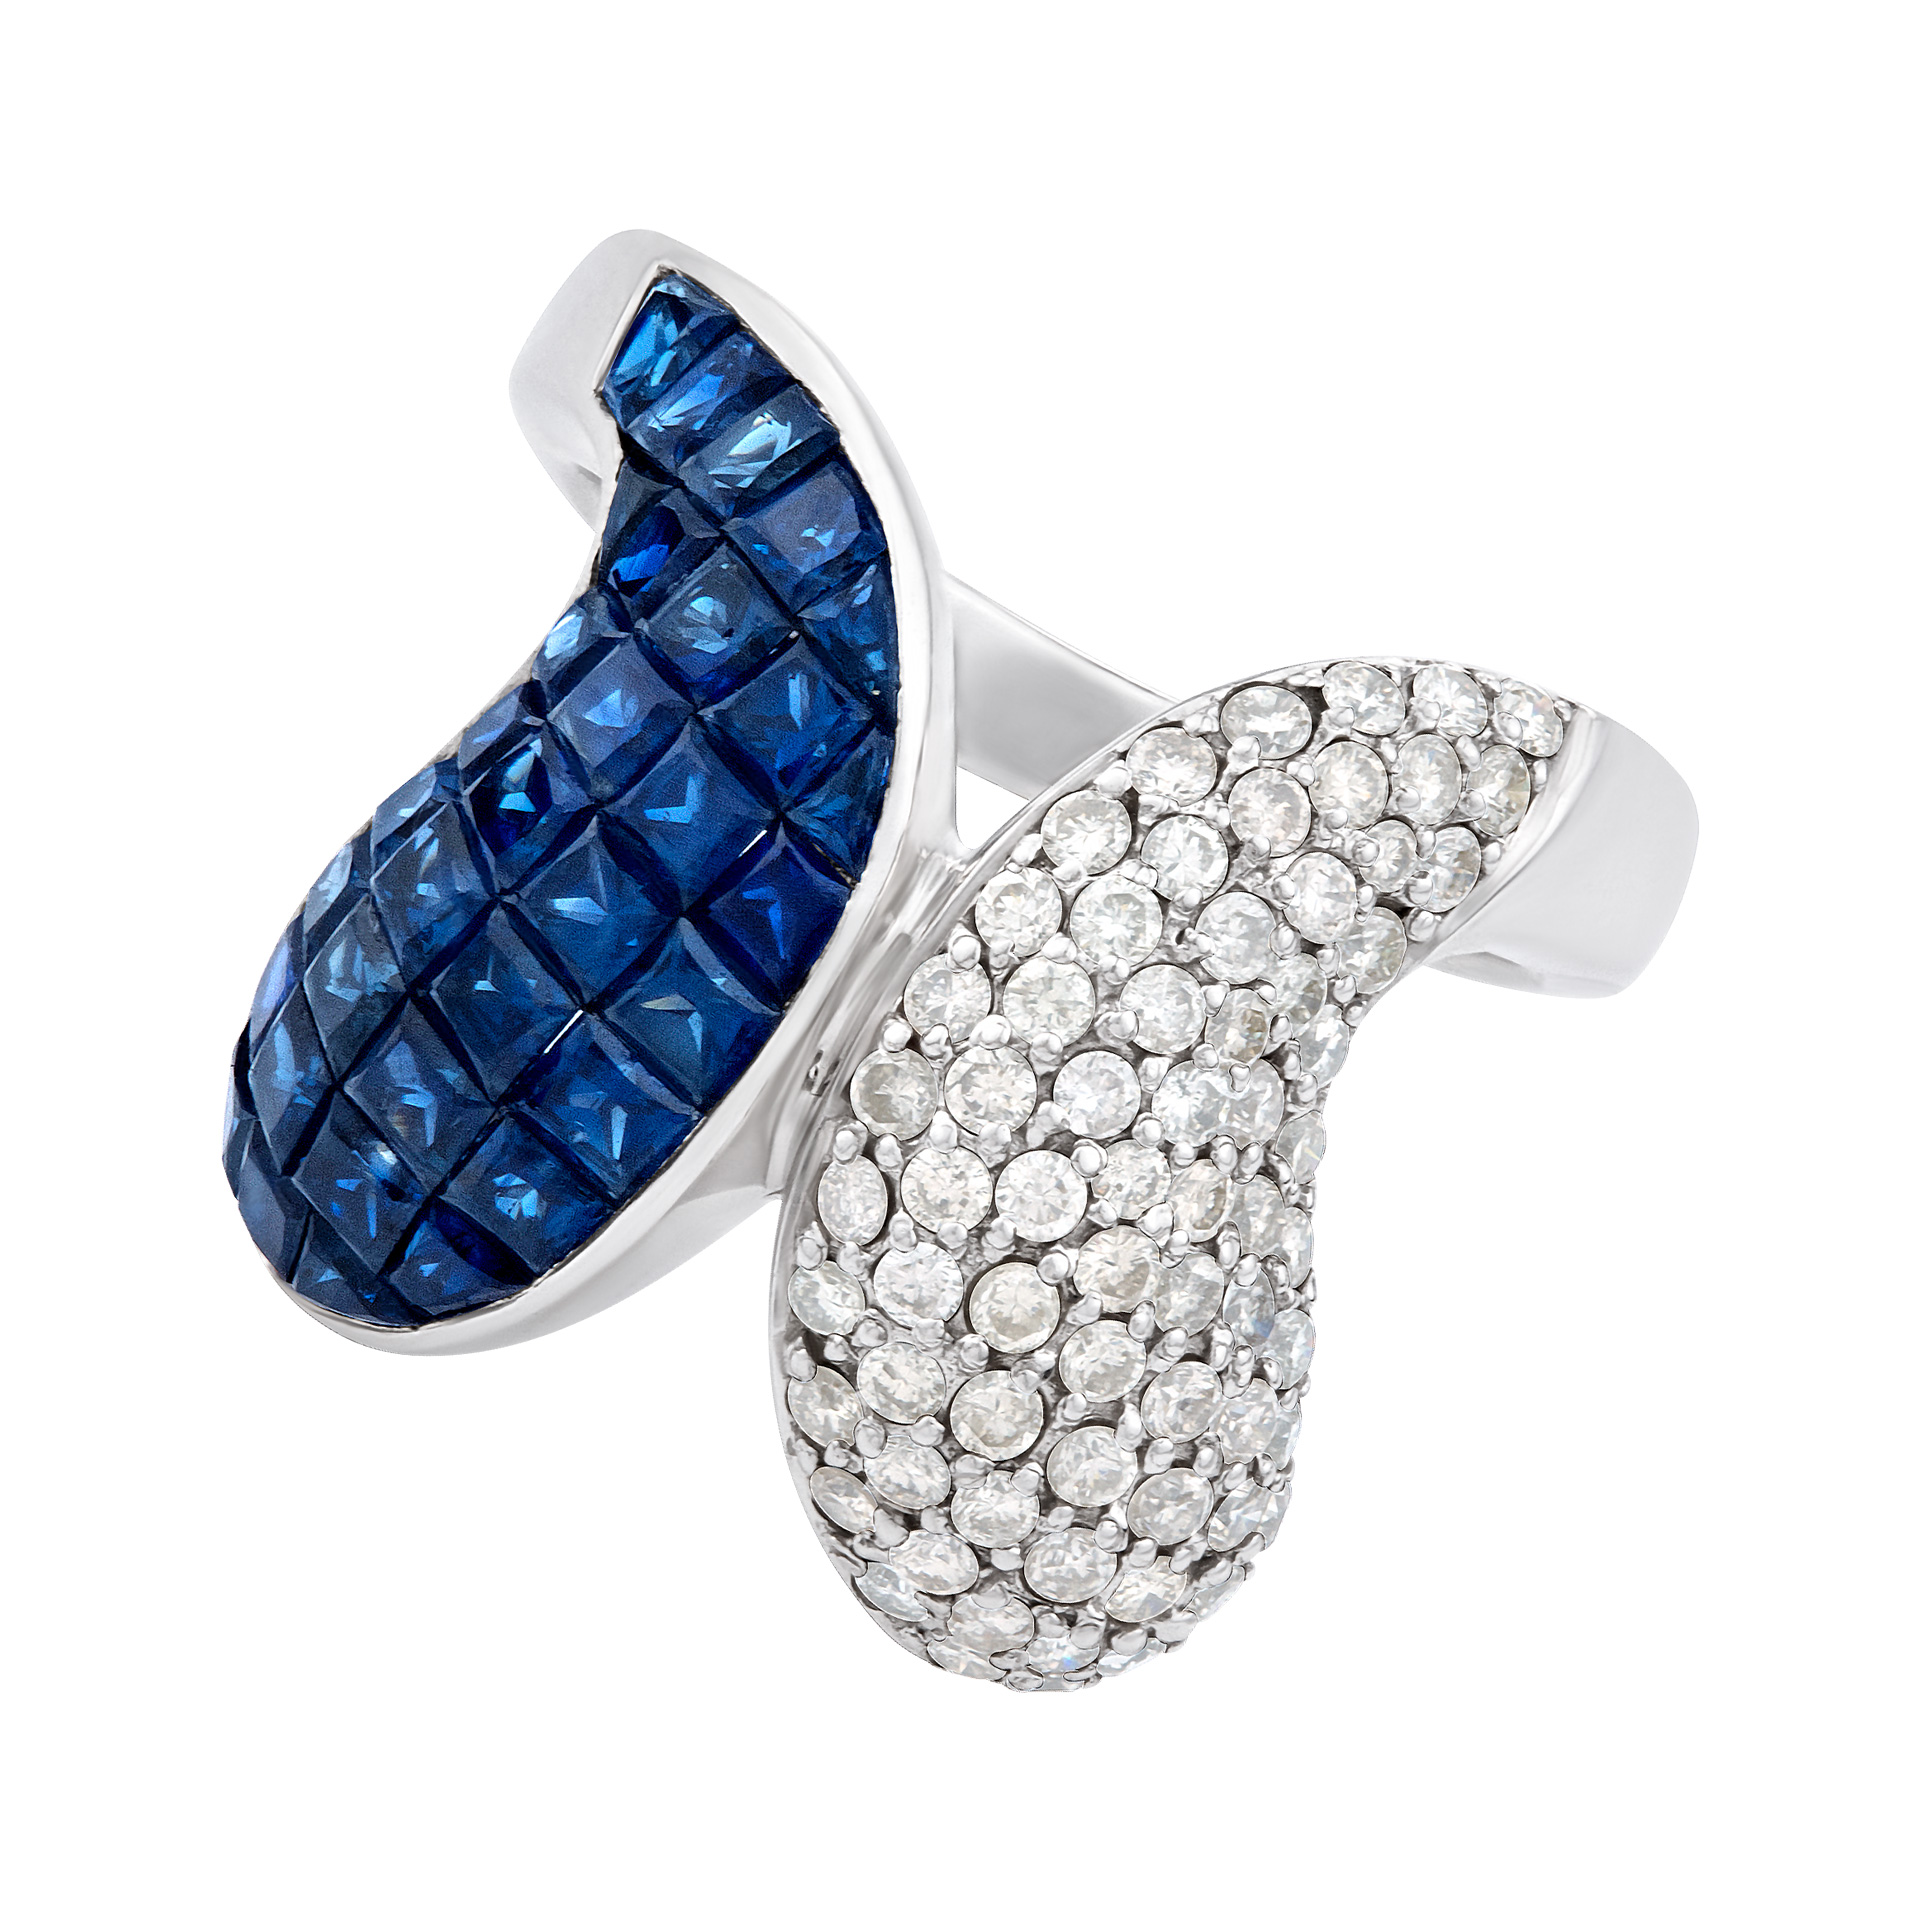 ladies sapphire and diamond ring set in 18k white gold image 1